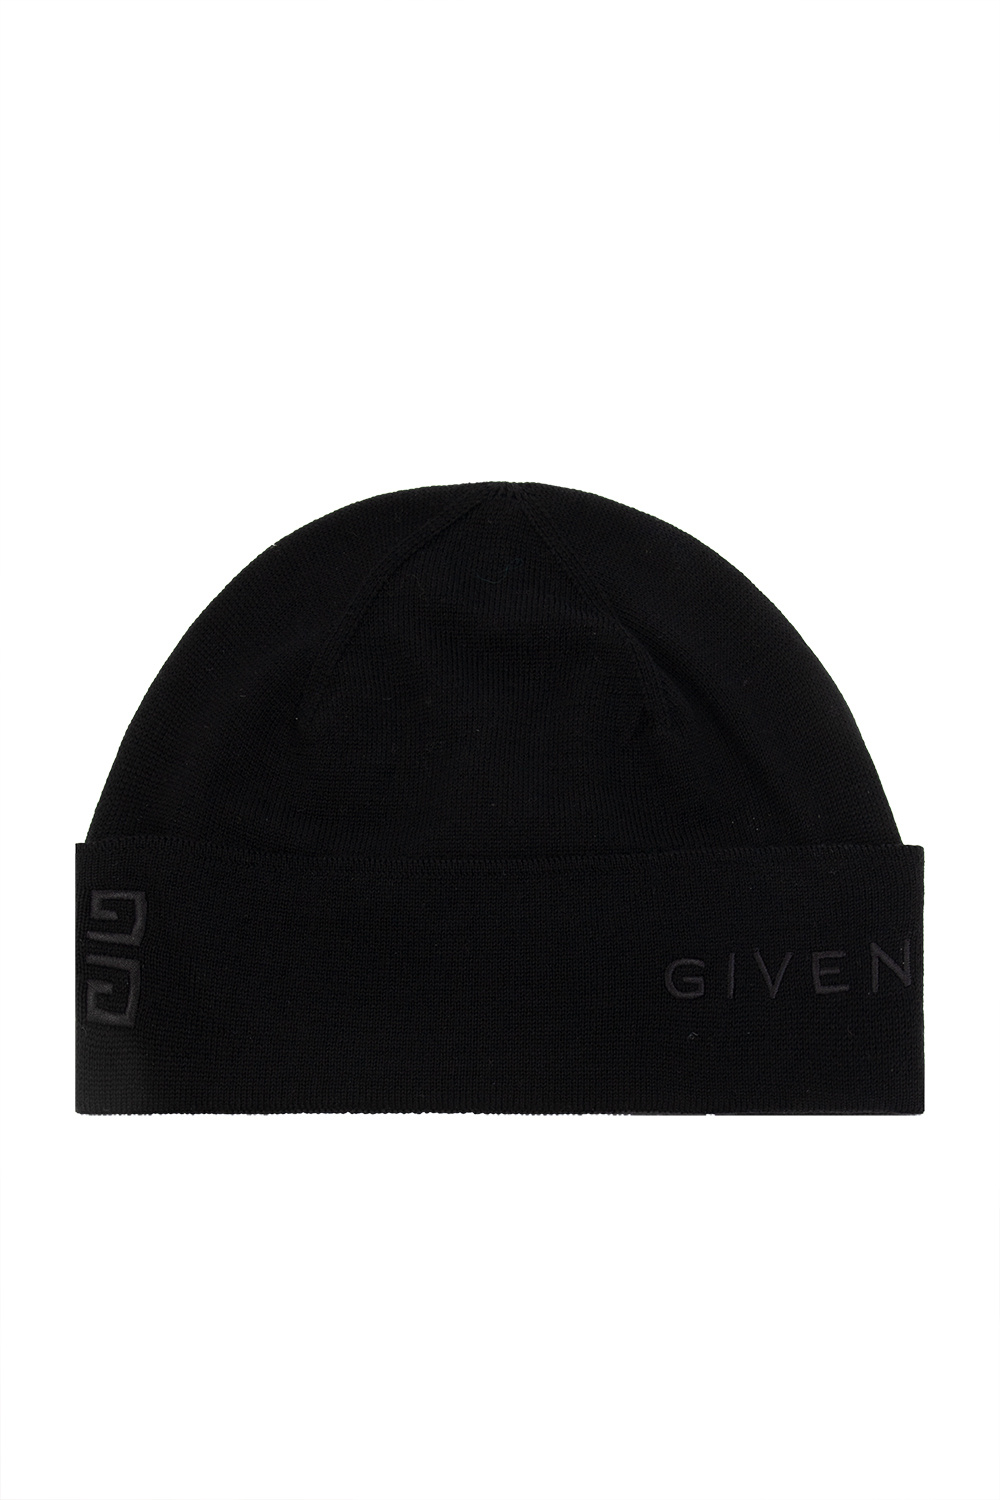 Givenchy sneakers beanie